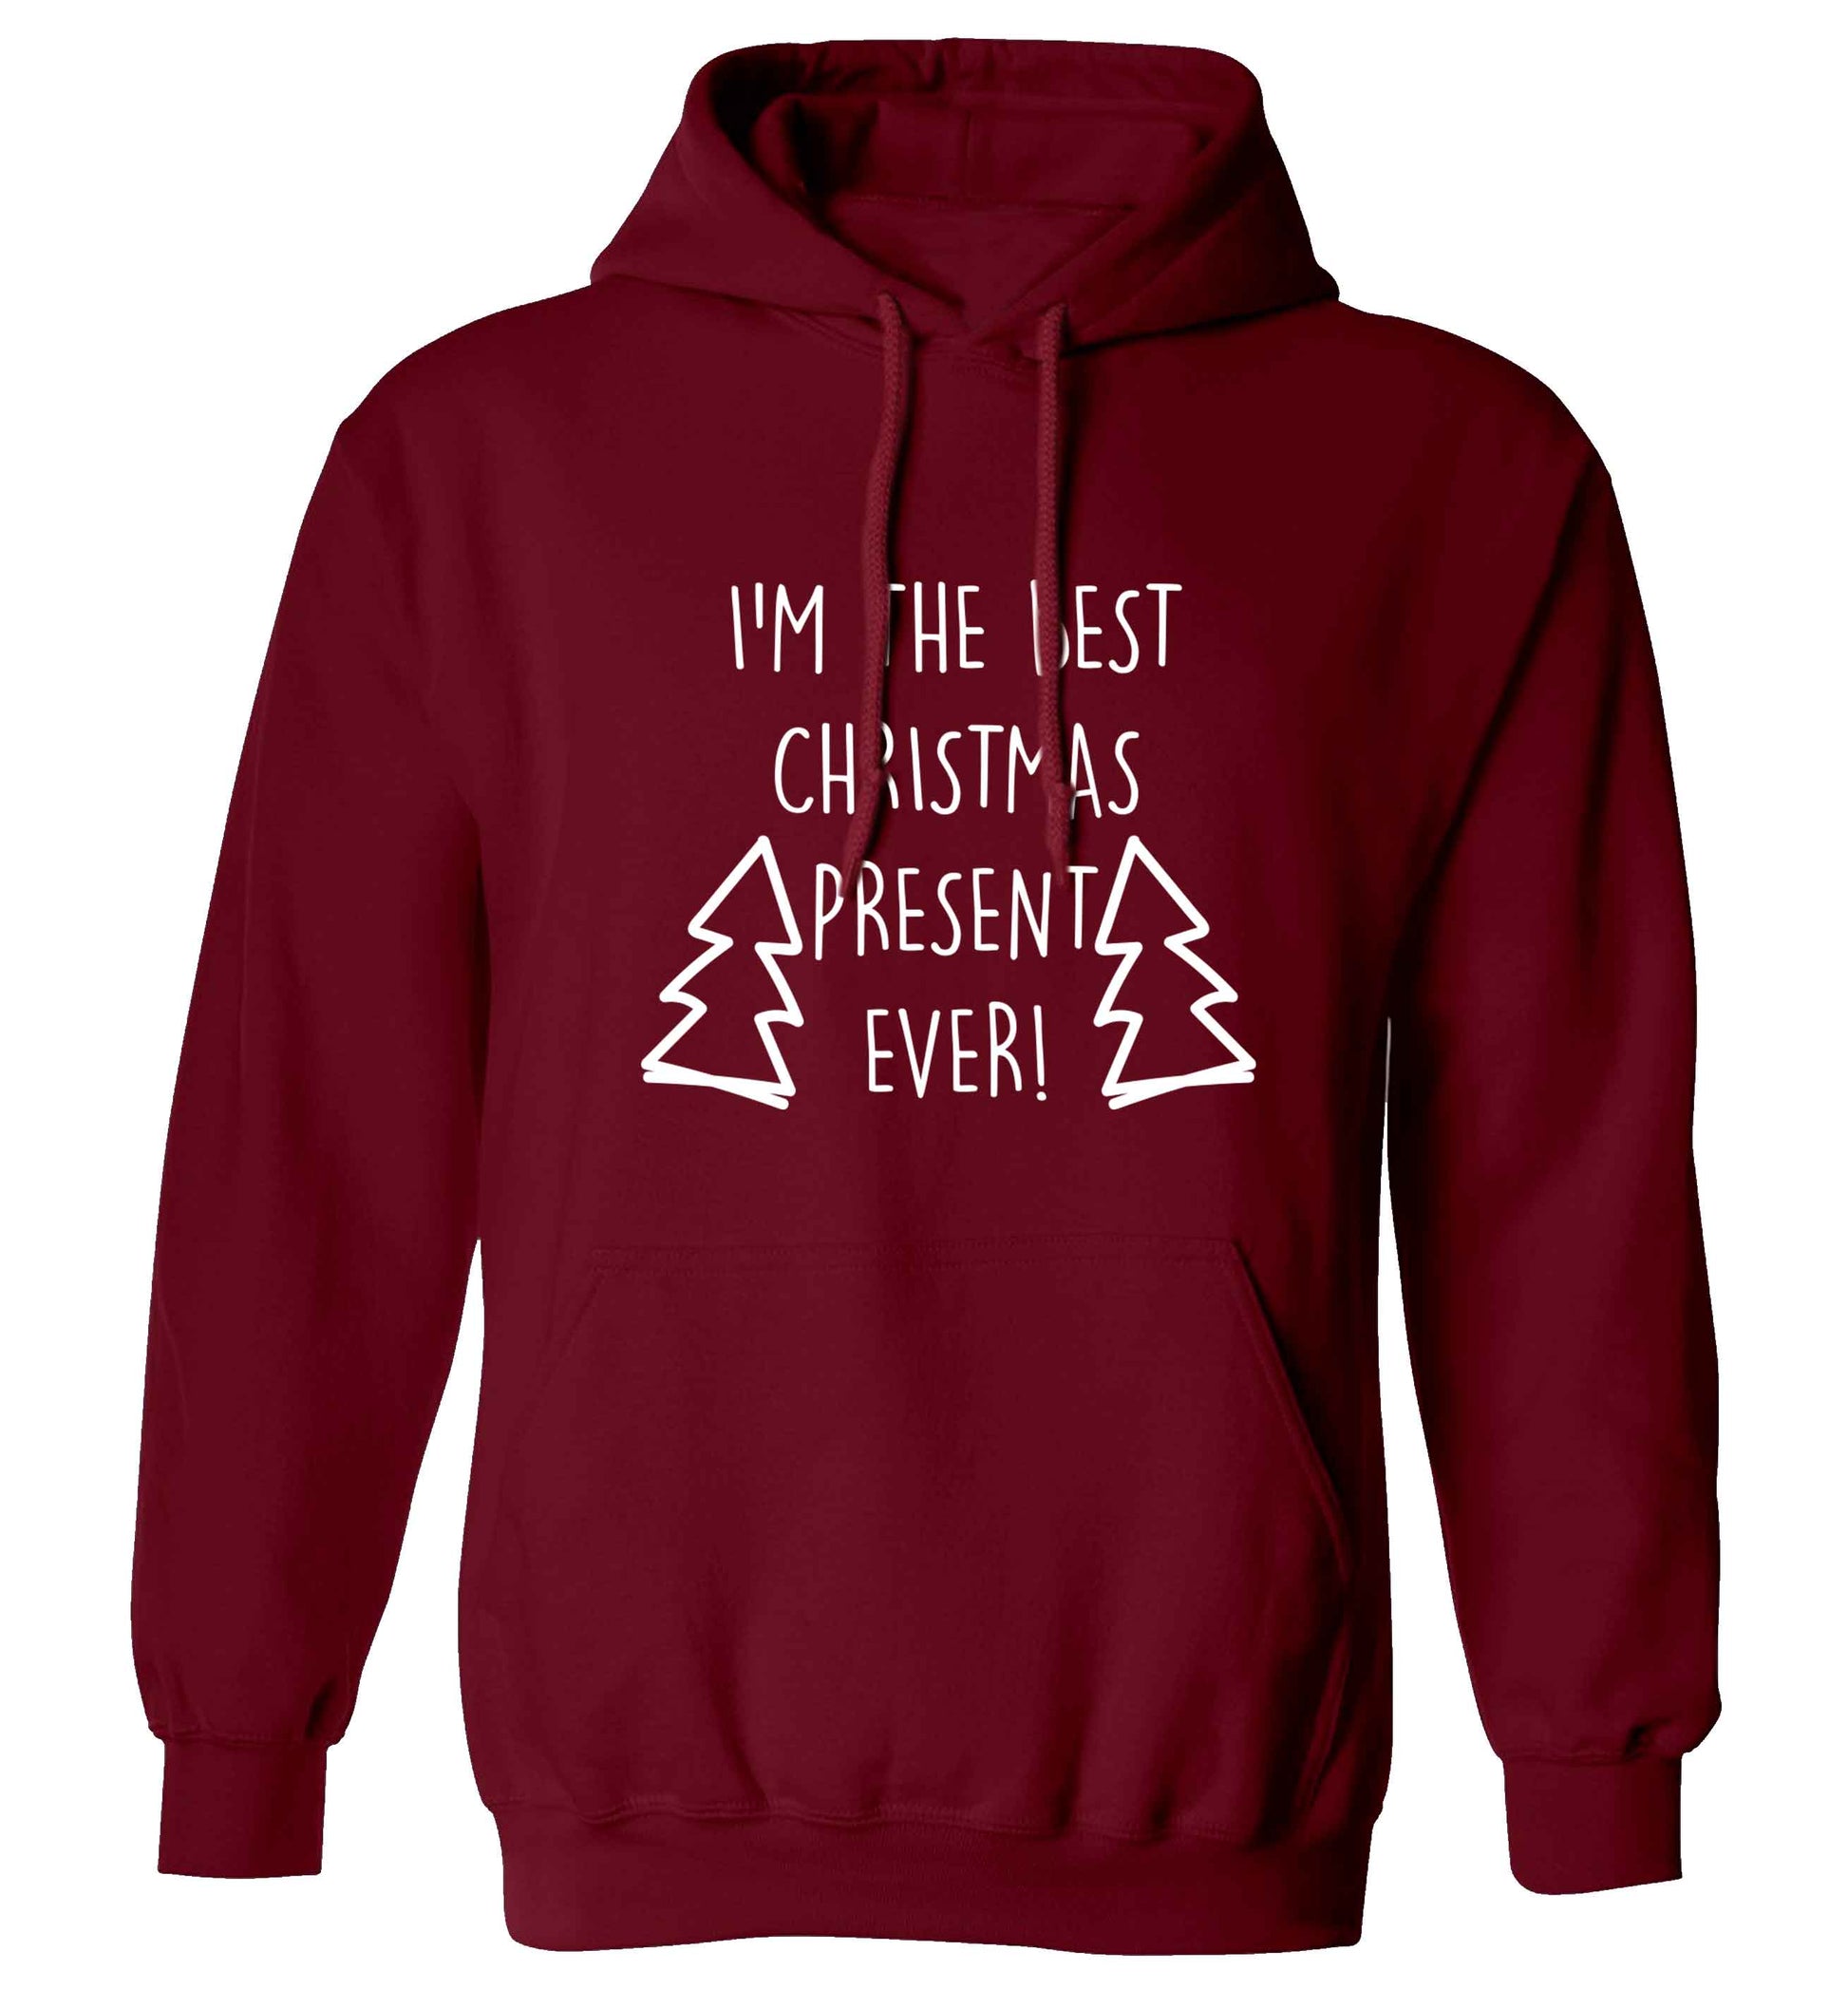 I'm the best Christmas present ever adults unisex maroon hoodie 2XL